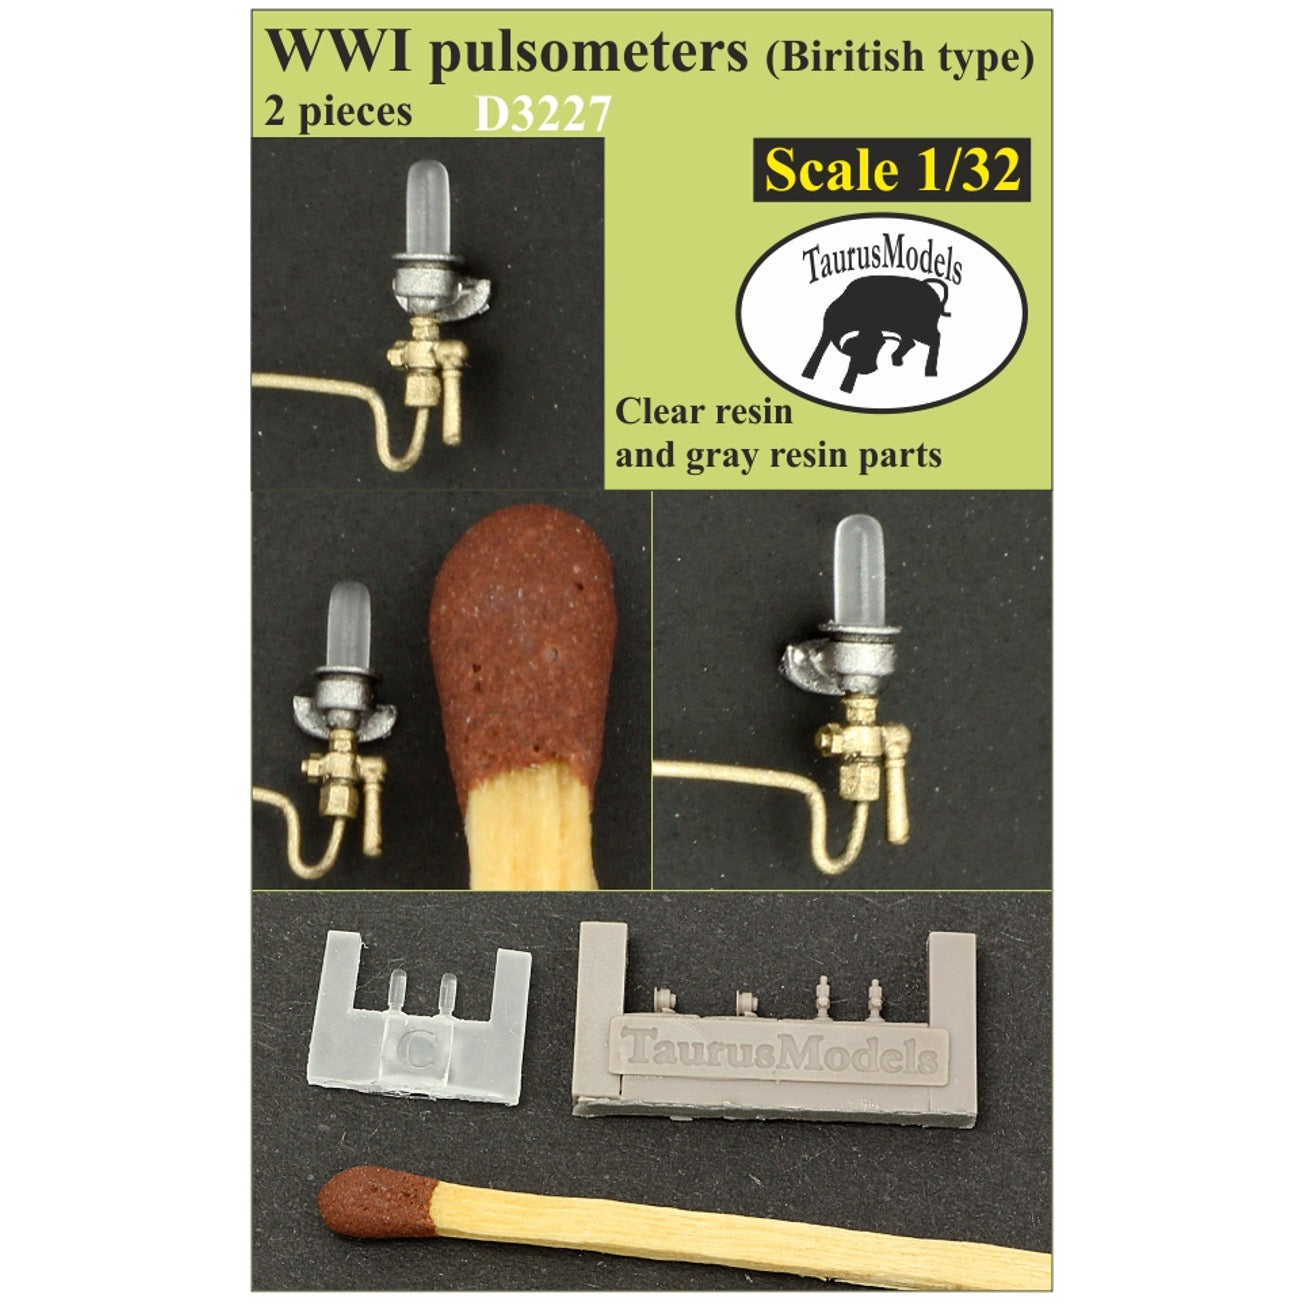 1/32 - WWI Pulsometers